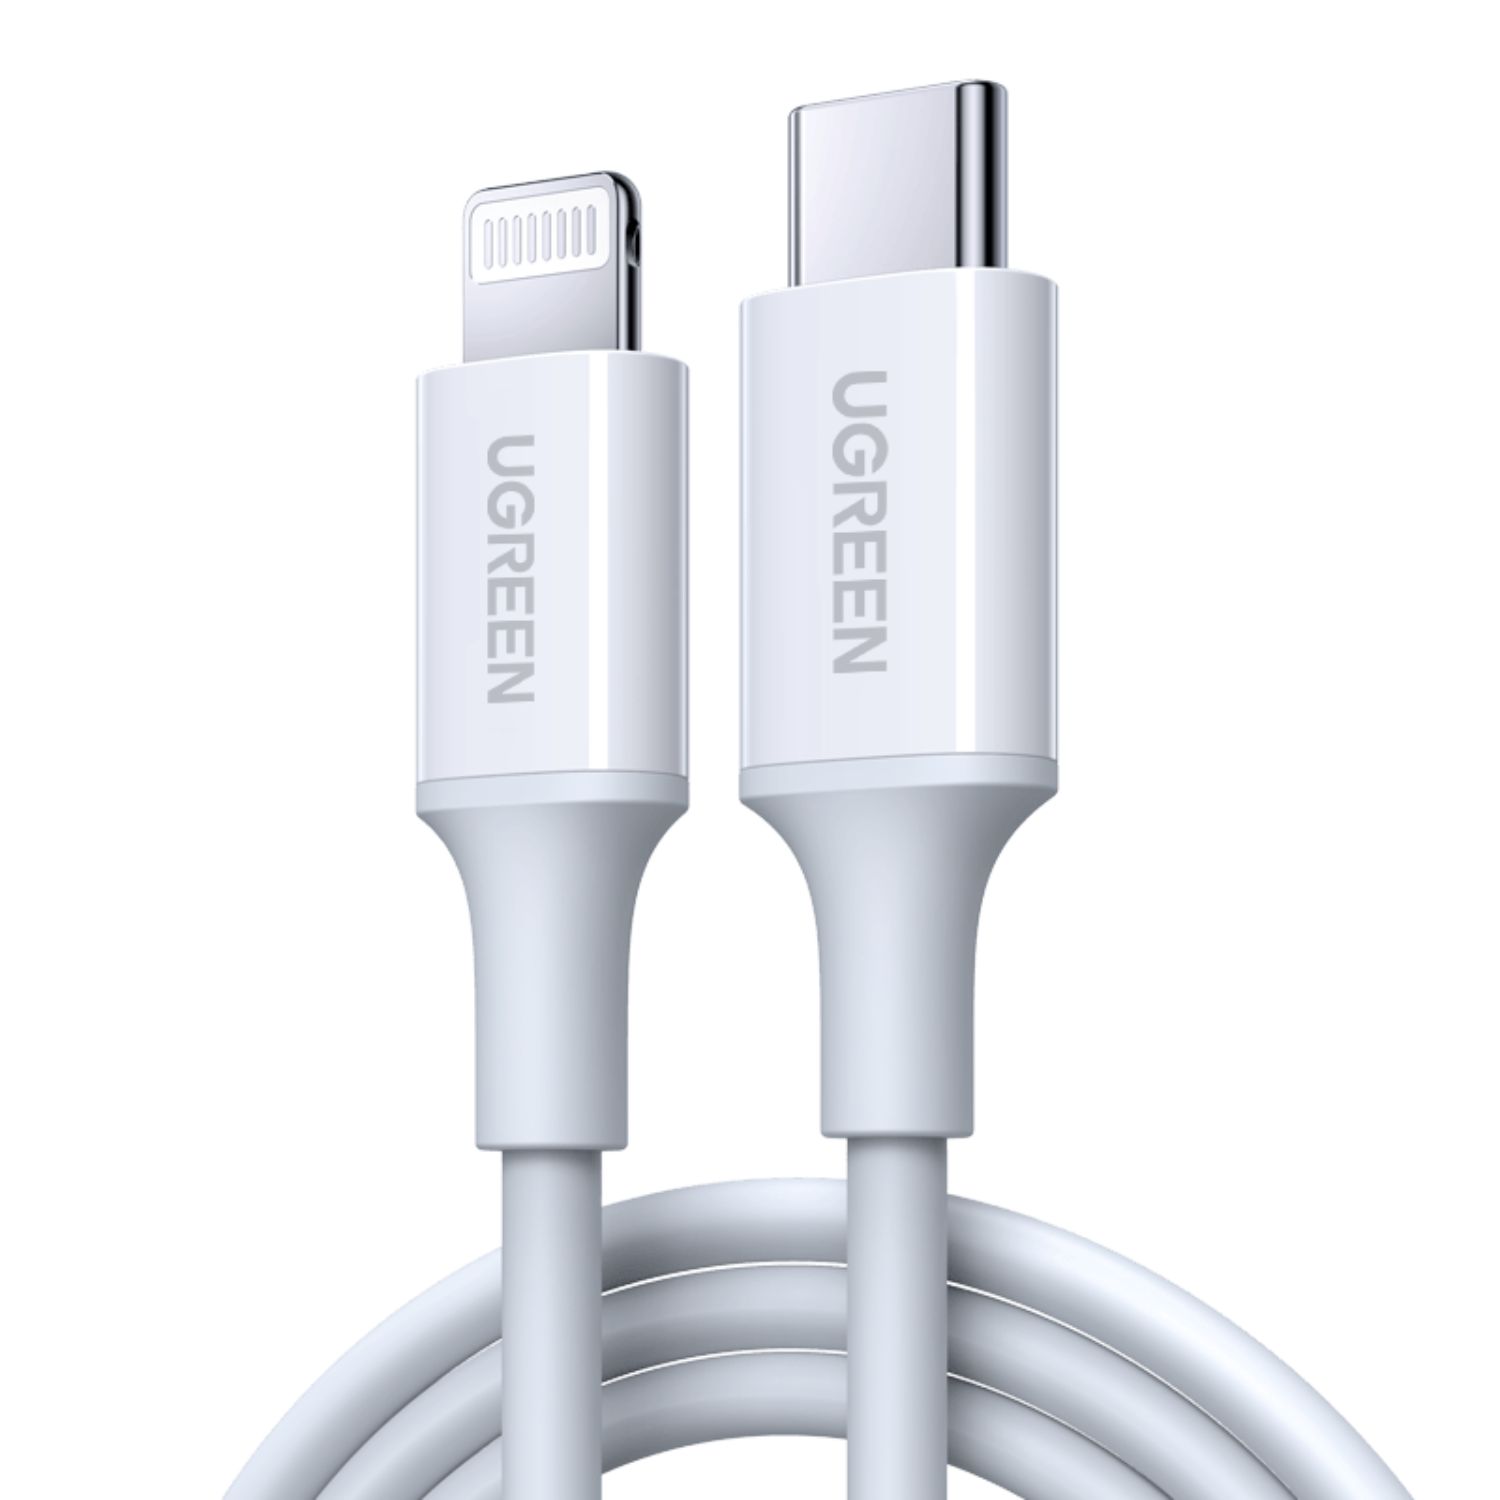 UGREEN MFi Fast Charging Lightning Cable - White